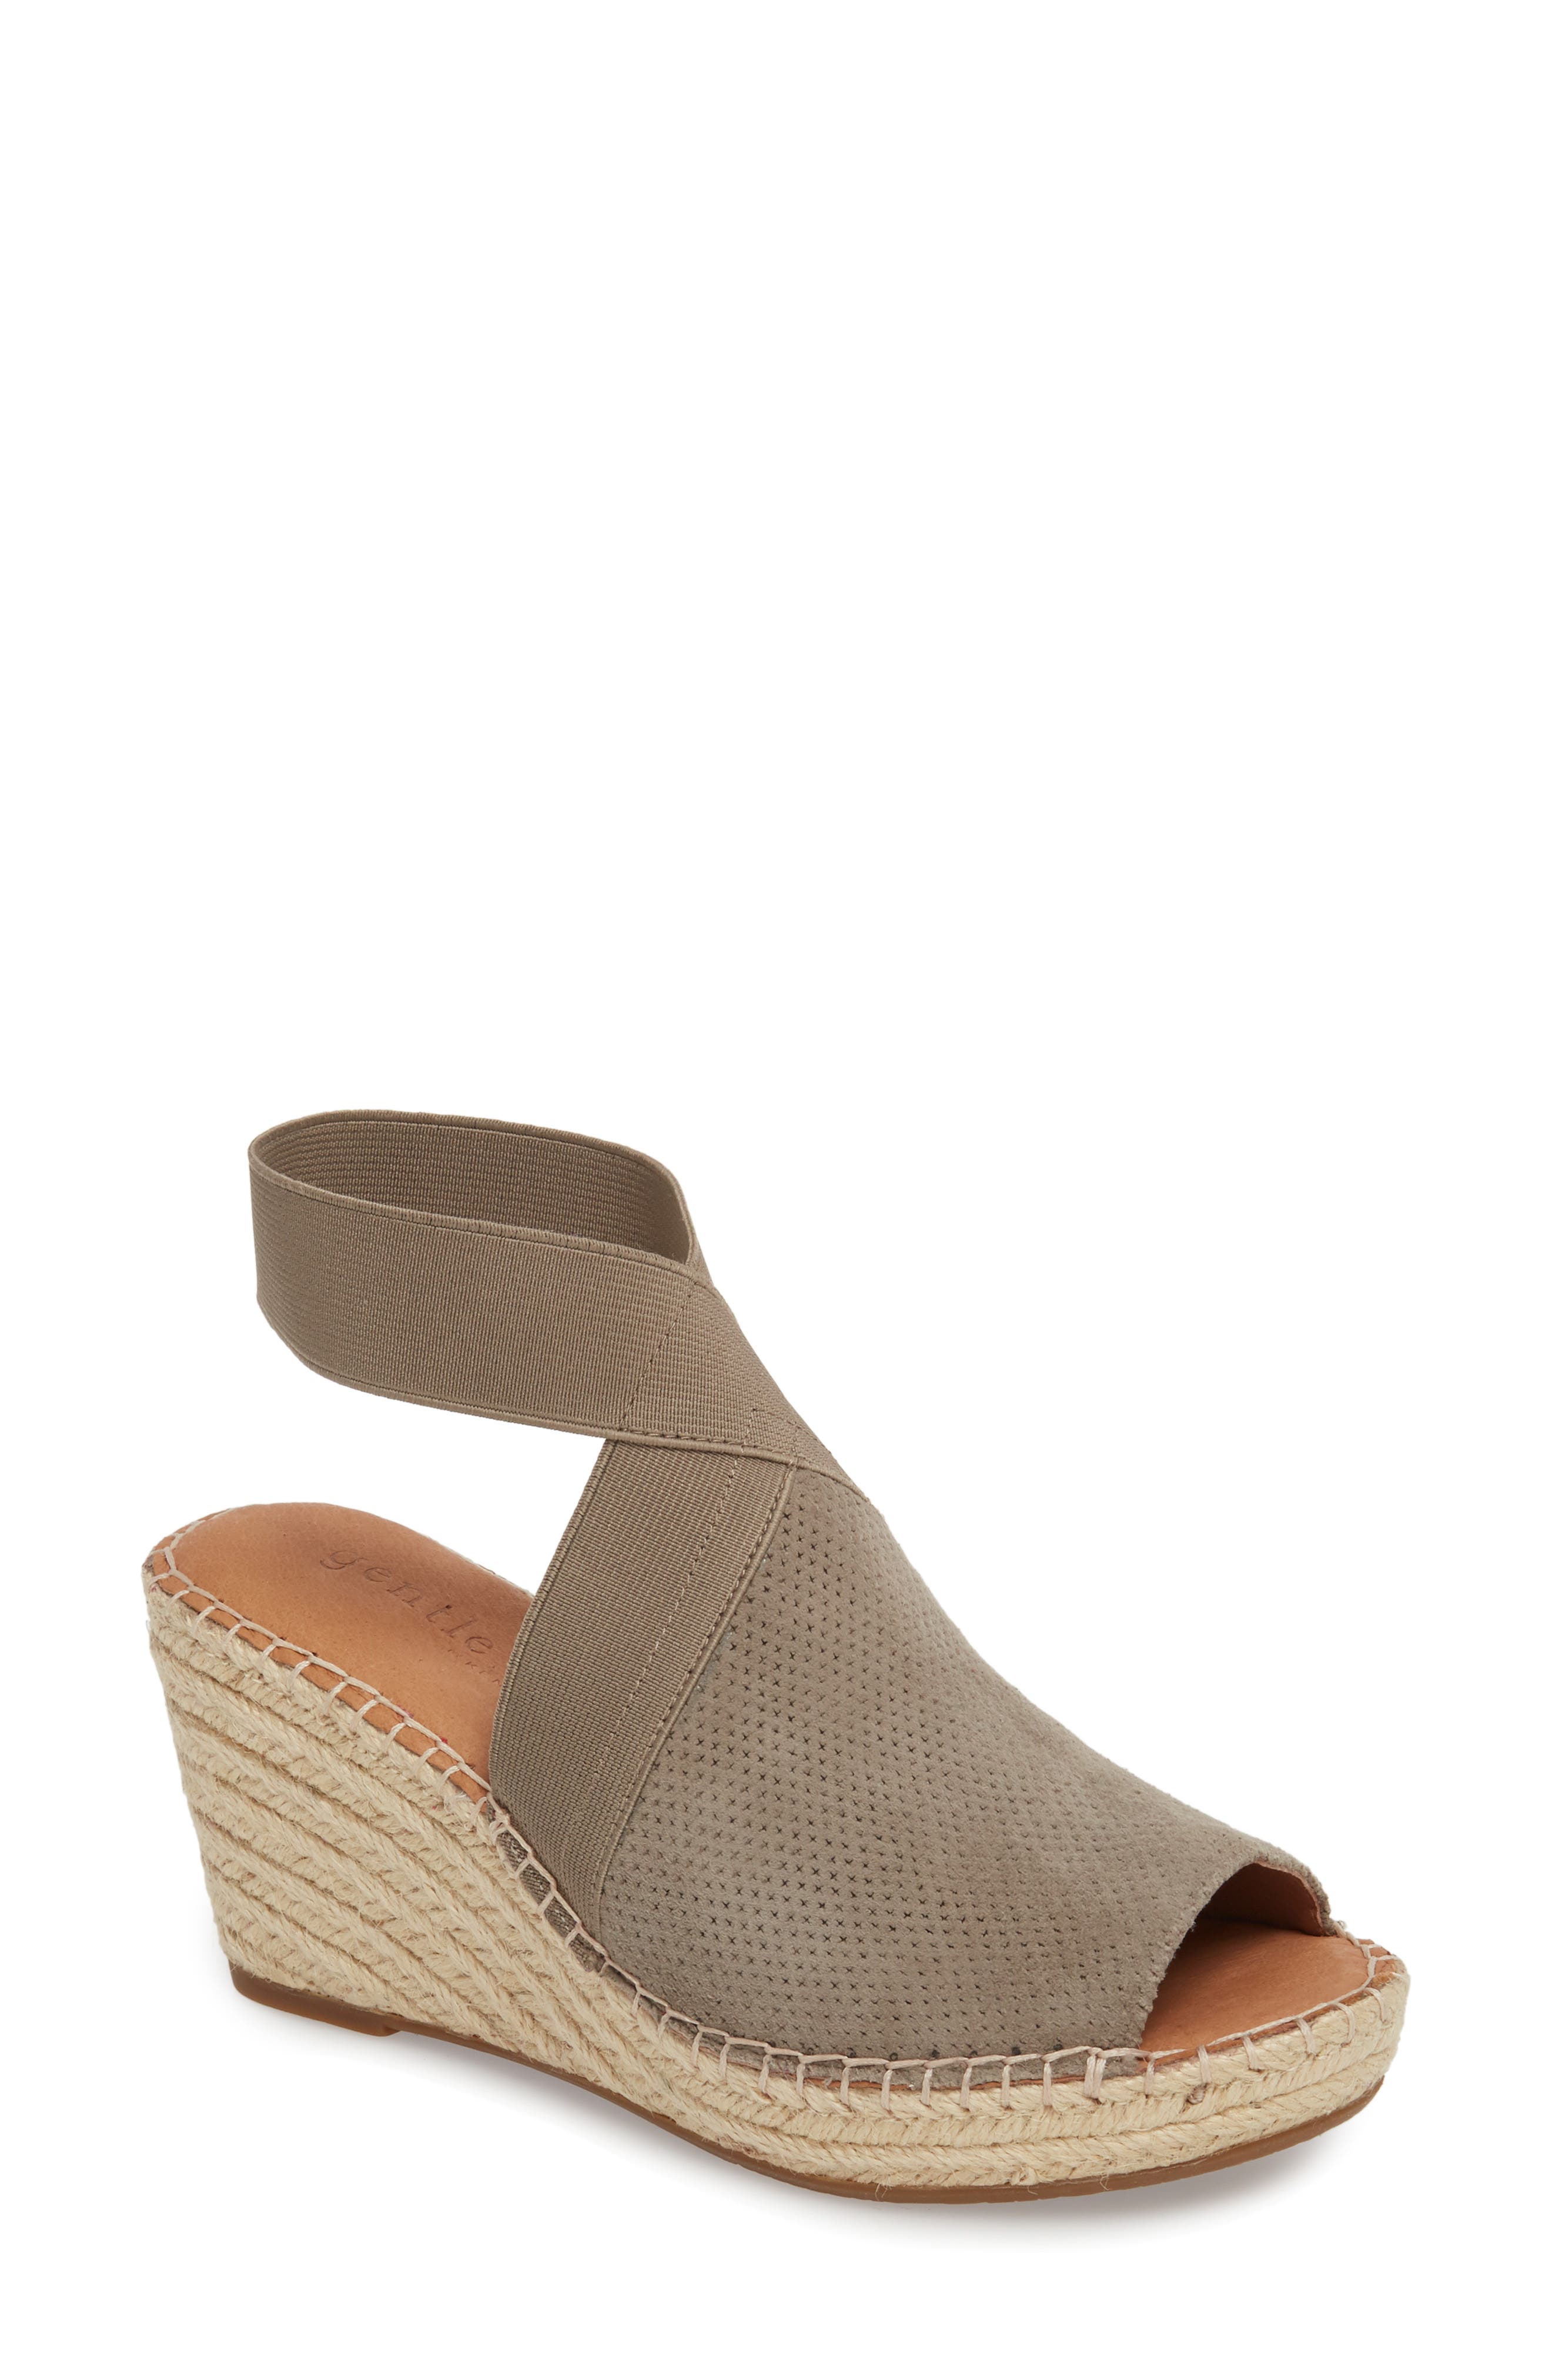 Gentle Souls by Kenneth Cole | Colleen Espadrille Wedge Sandal ...